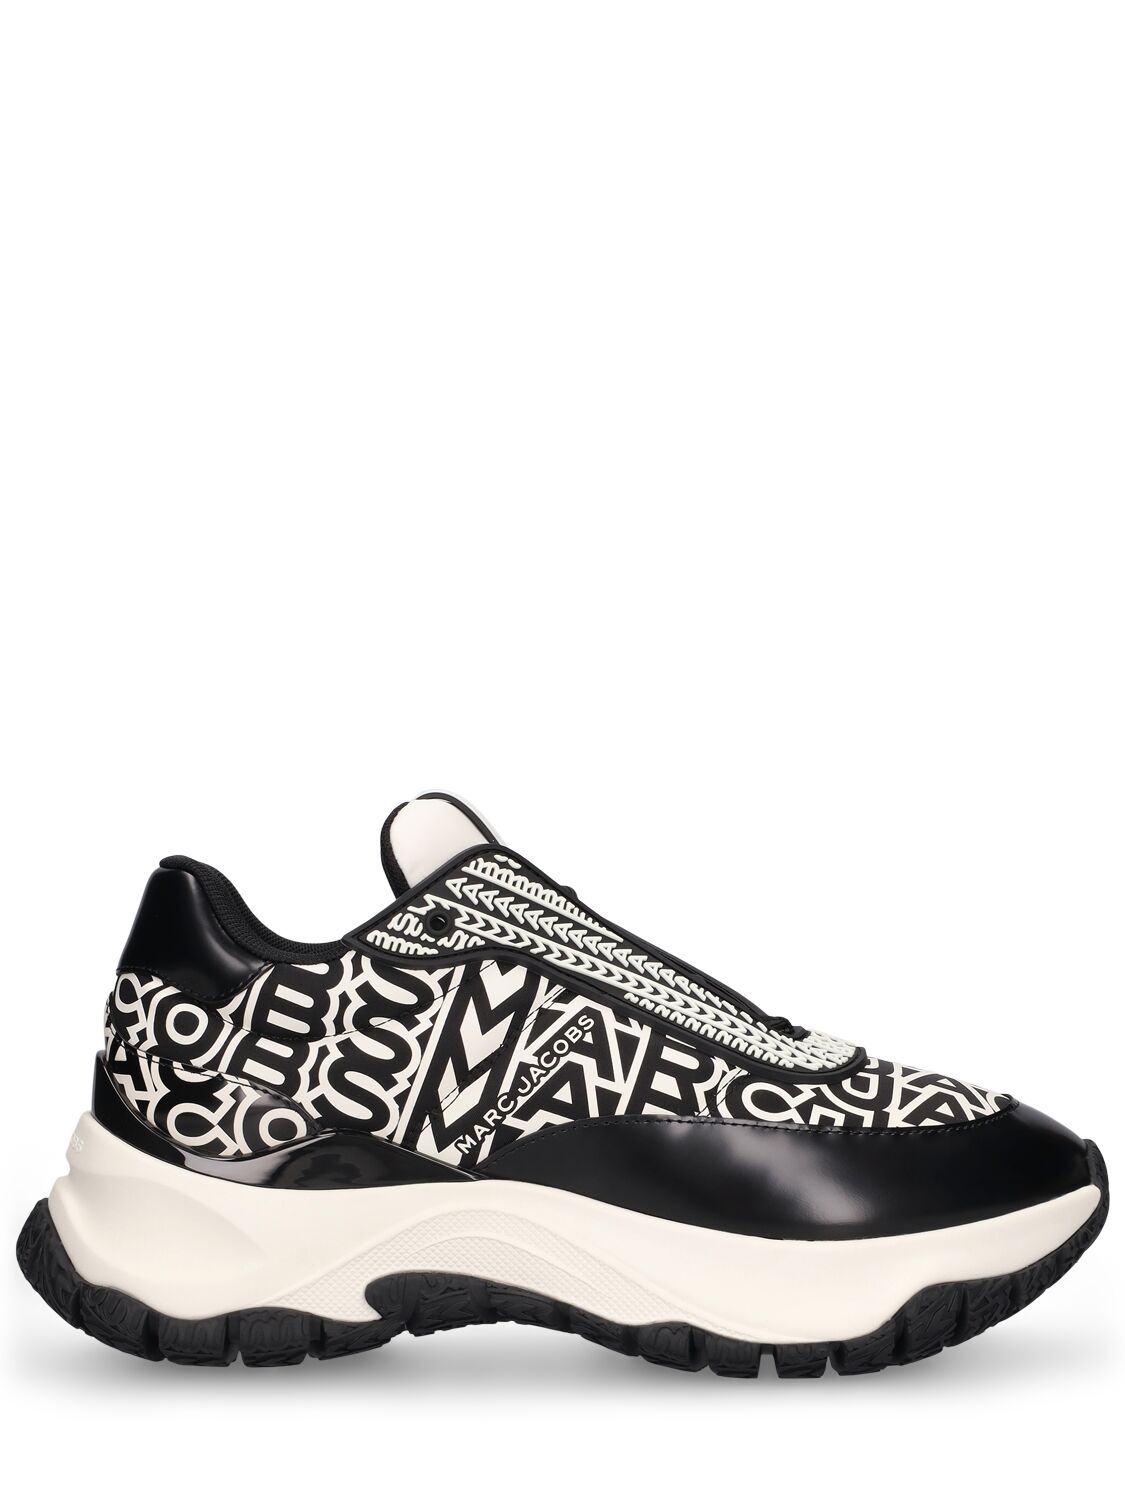 Image of The Monogram Lazy Runner Sneakers